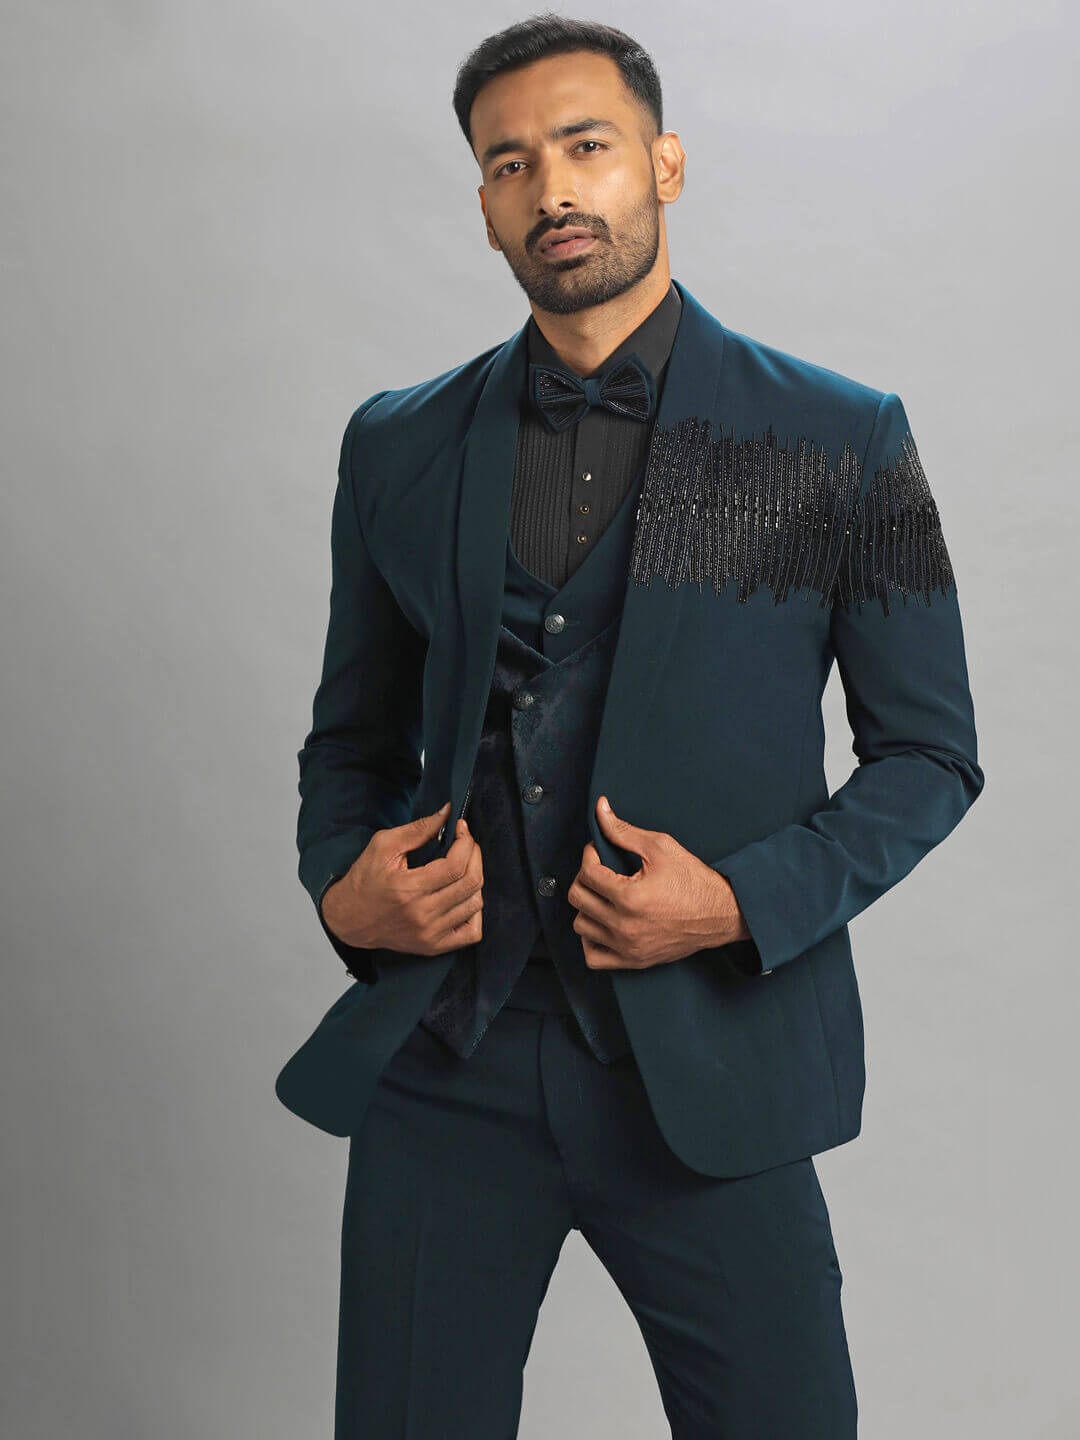 Green 3 Piece Suit Stylish Black Embroidered